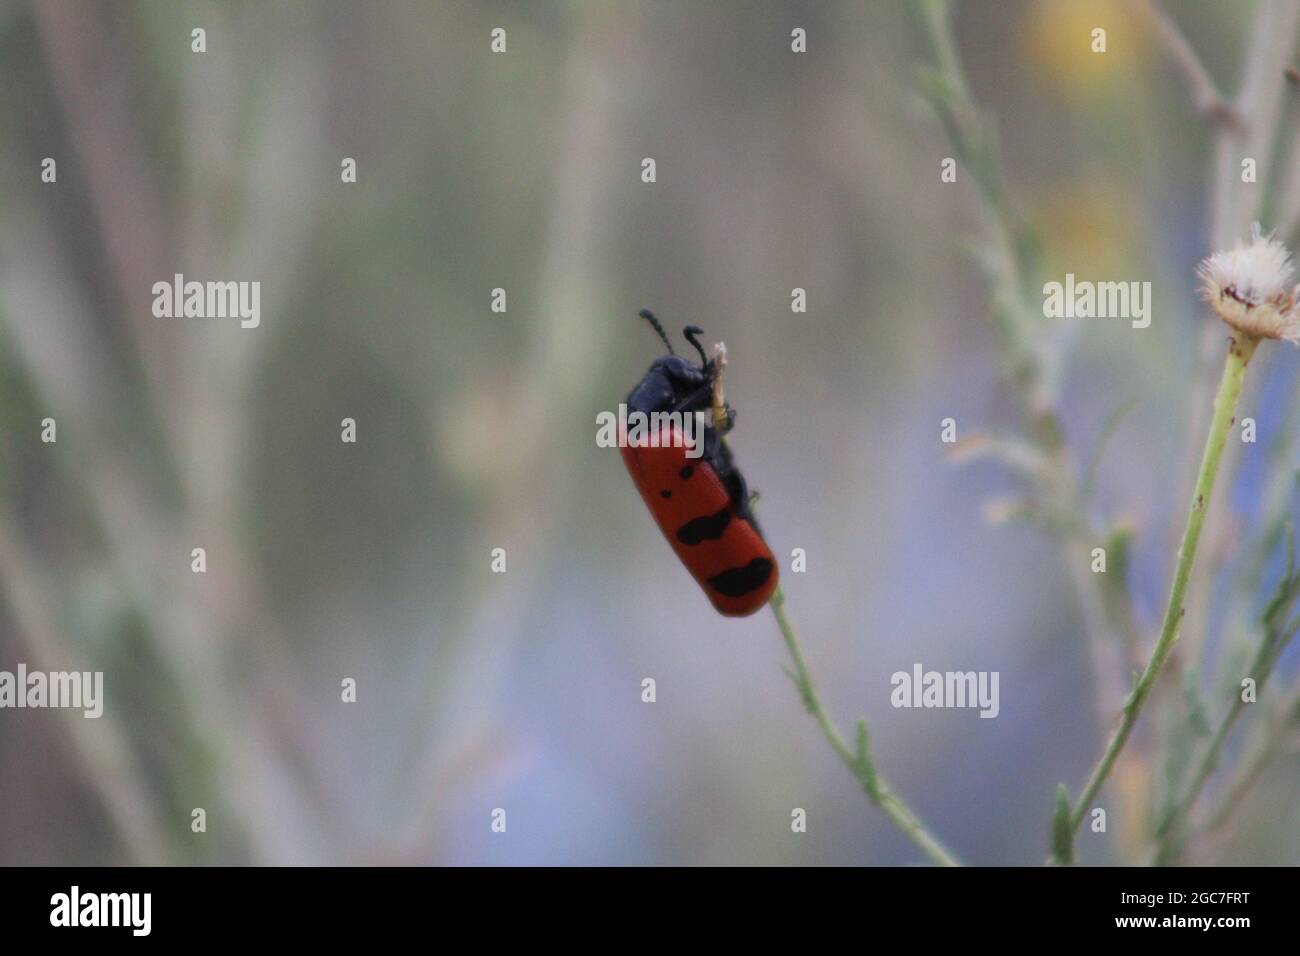 insect growth stages Stock Photo